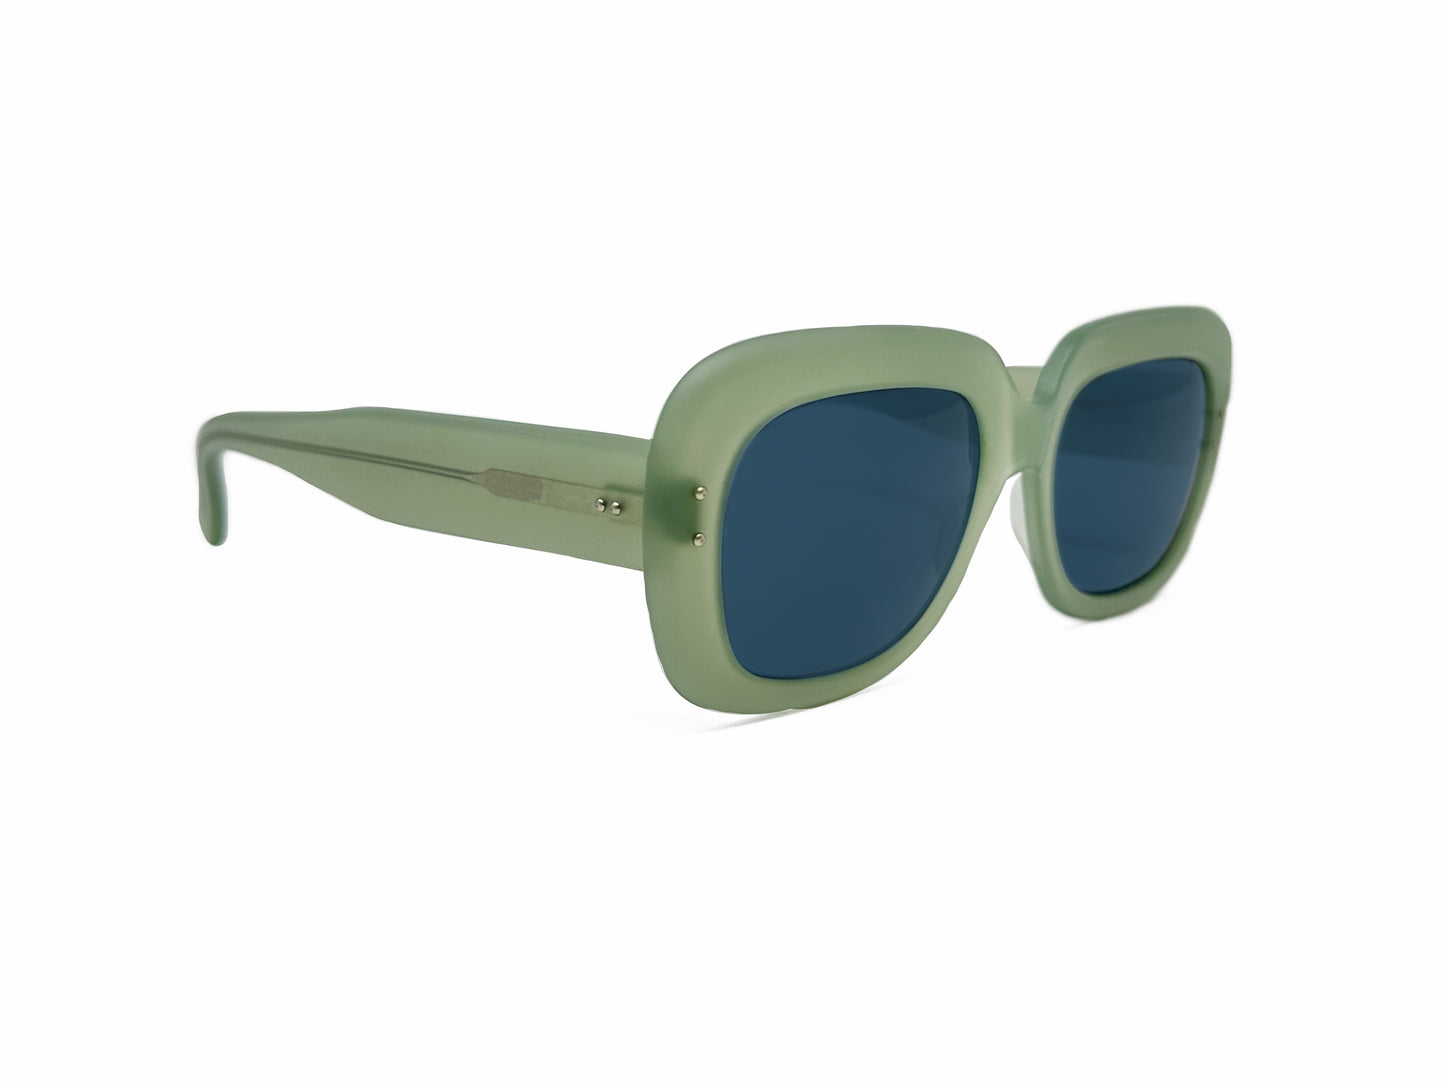 Kador rounded-square, acetate sunglasses. Model: 2. Color: M/1653 - Mint green with blue lenses. Side view.